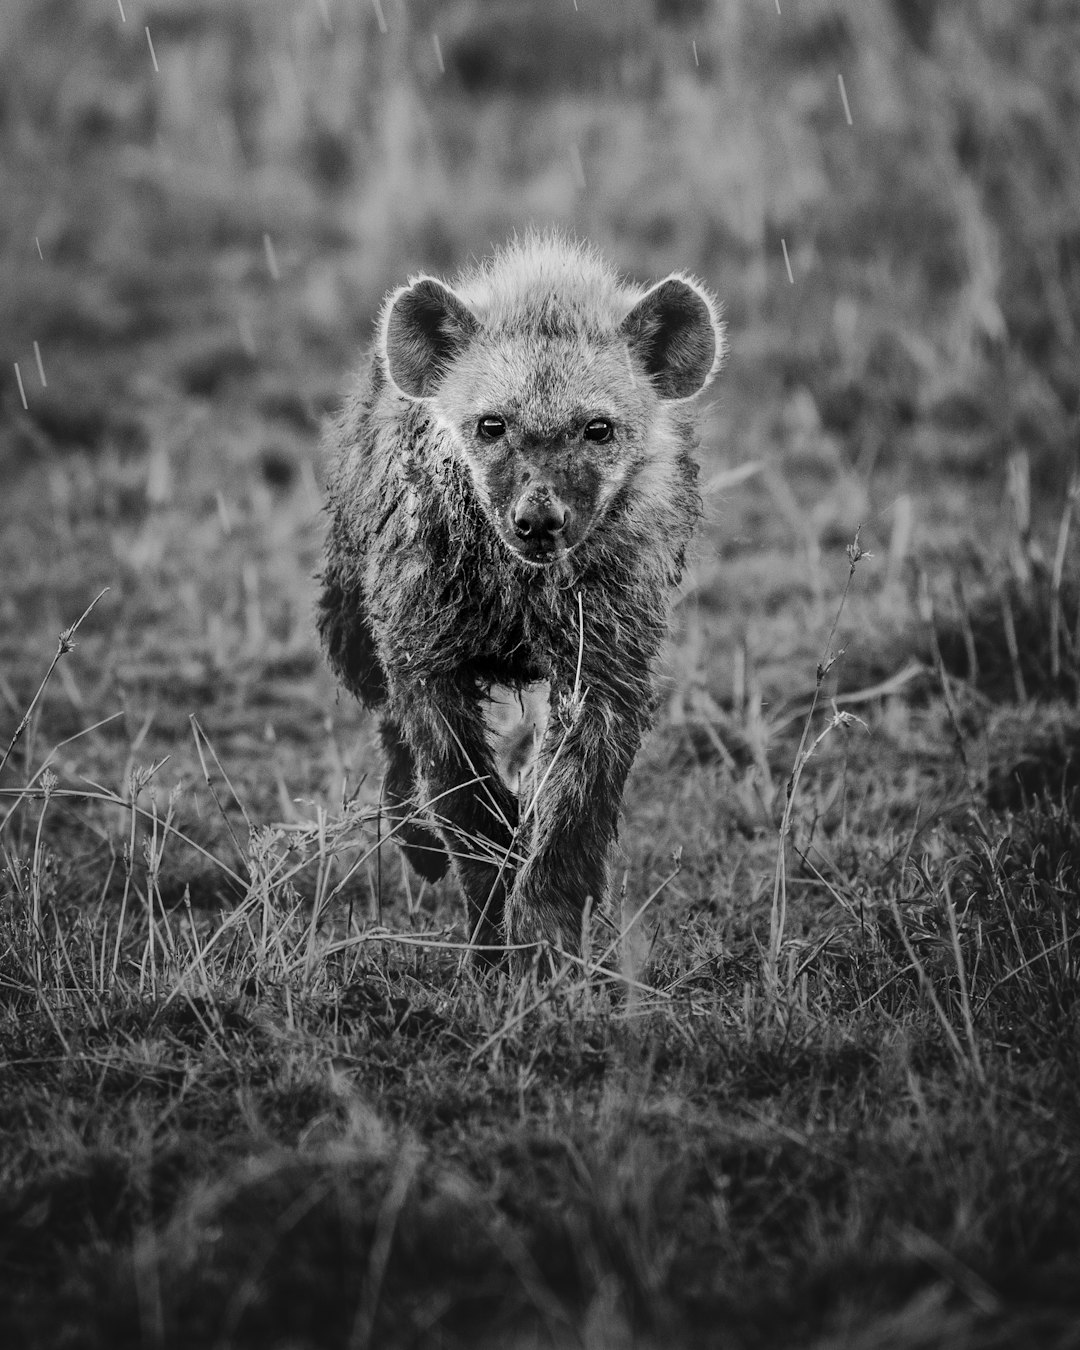 grayscale photo of a bear on grass field